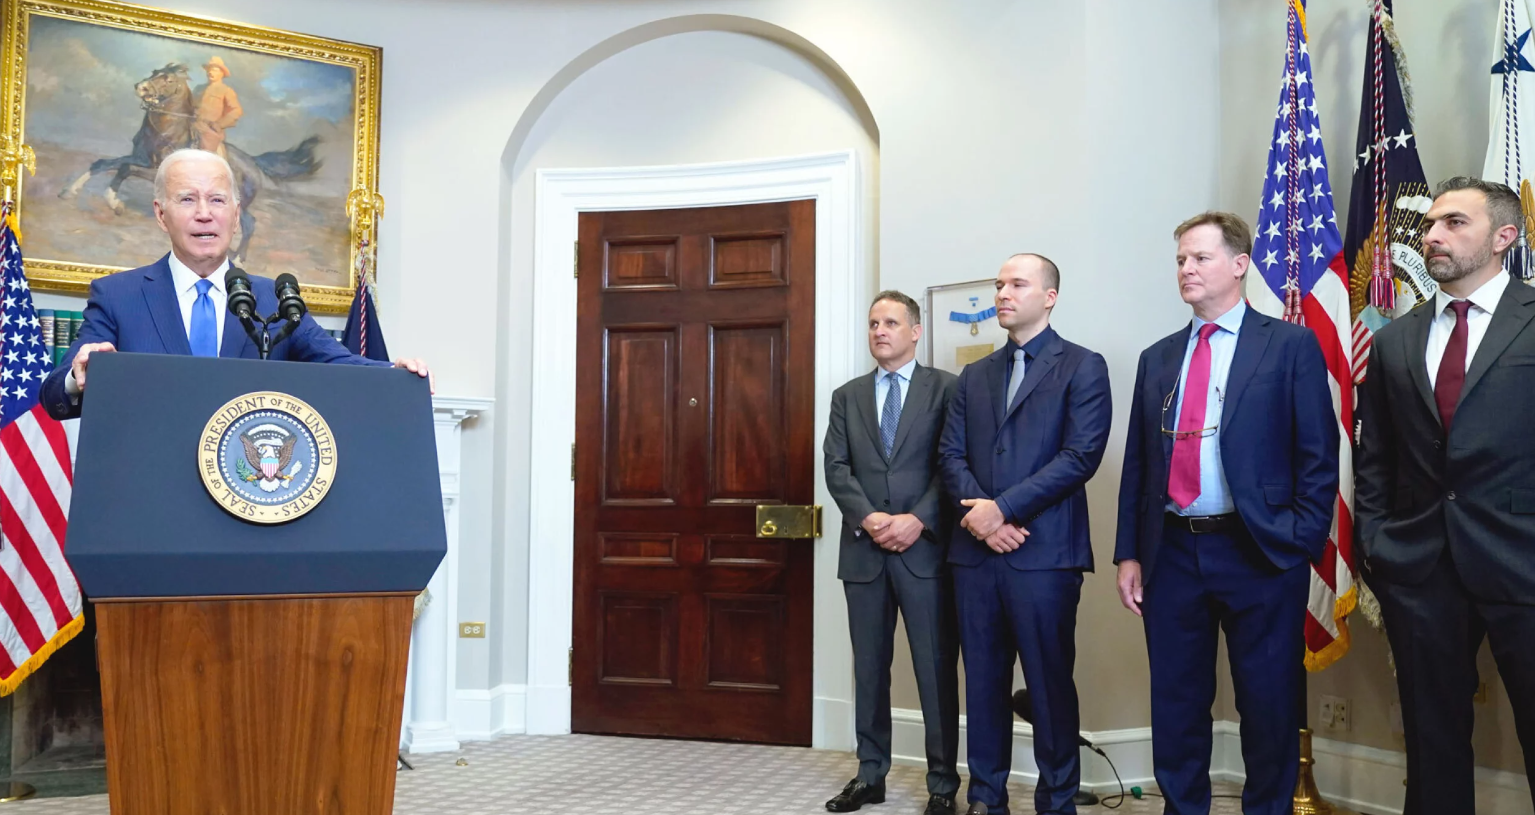 President Biden stands with Amazon CEO Andy Jassy and other leaders